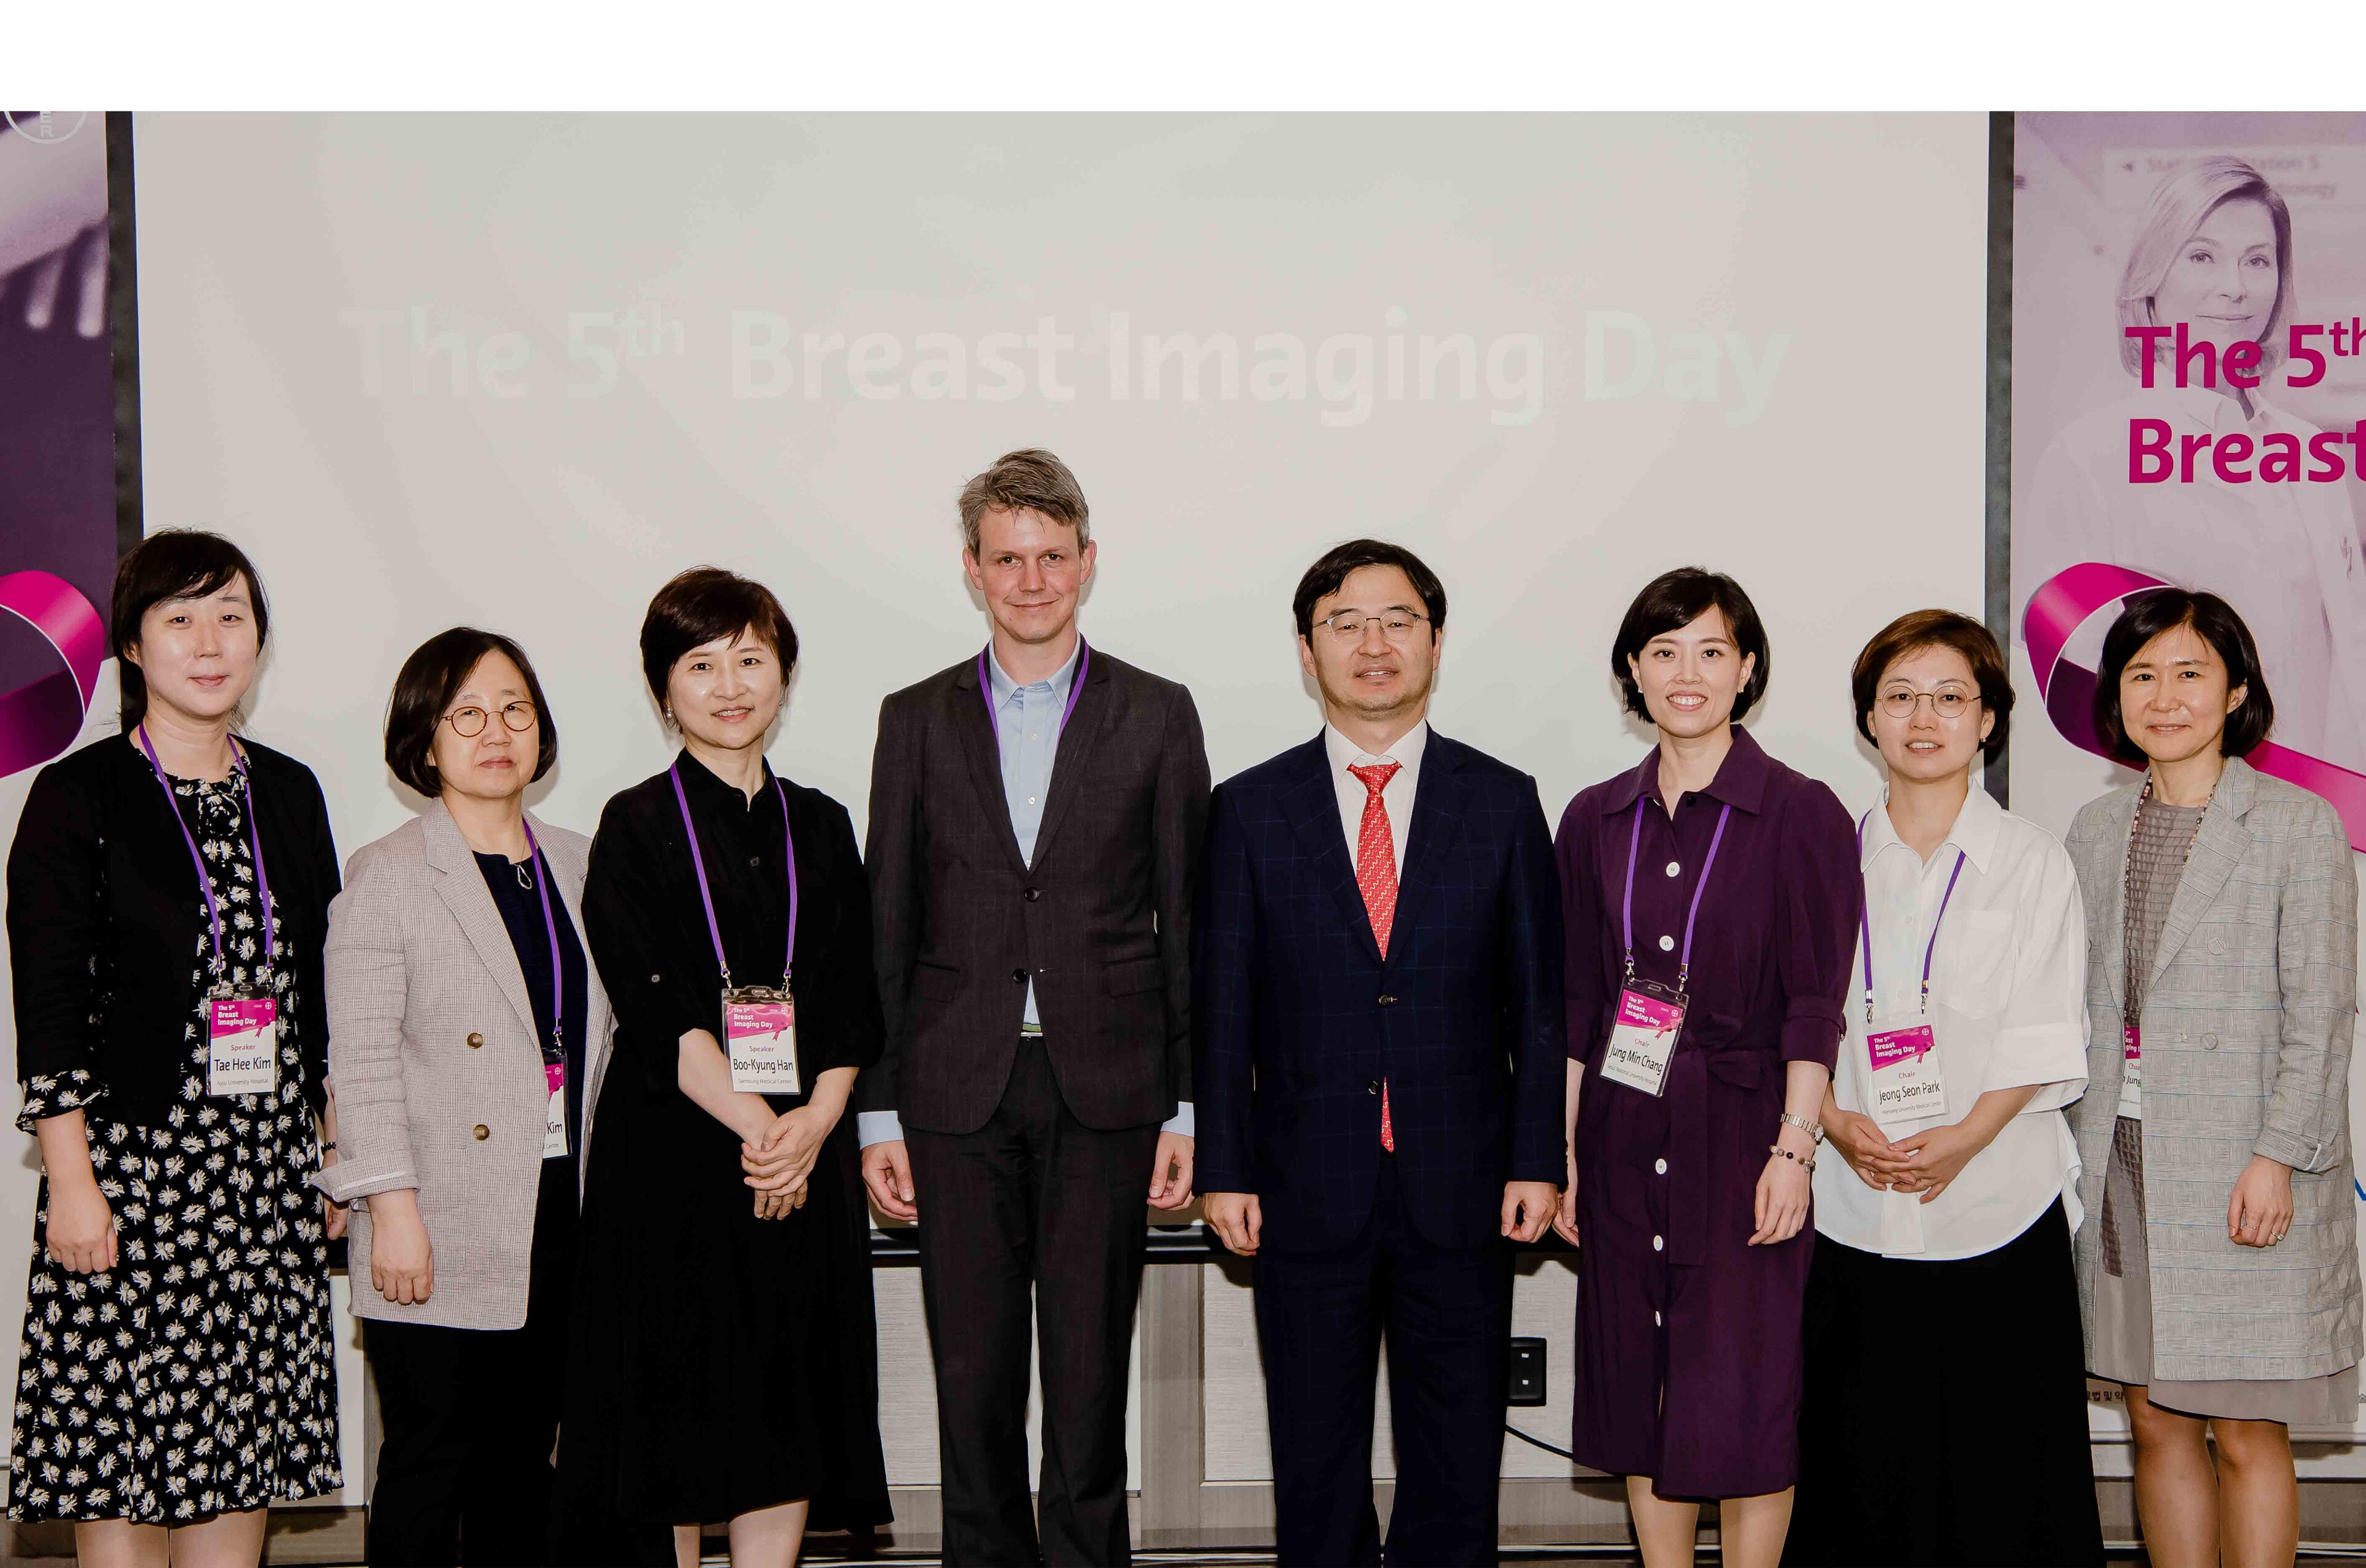 Breast imaging day 2019 preview image